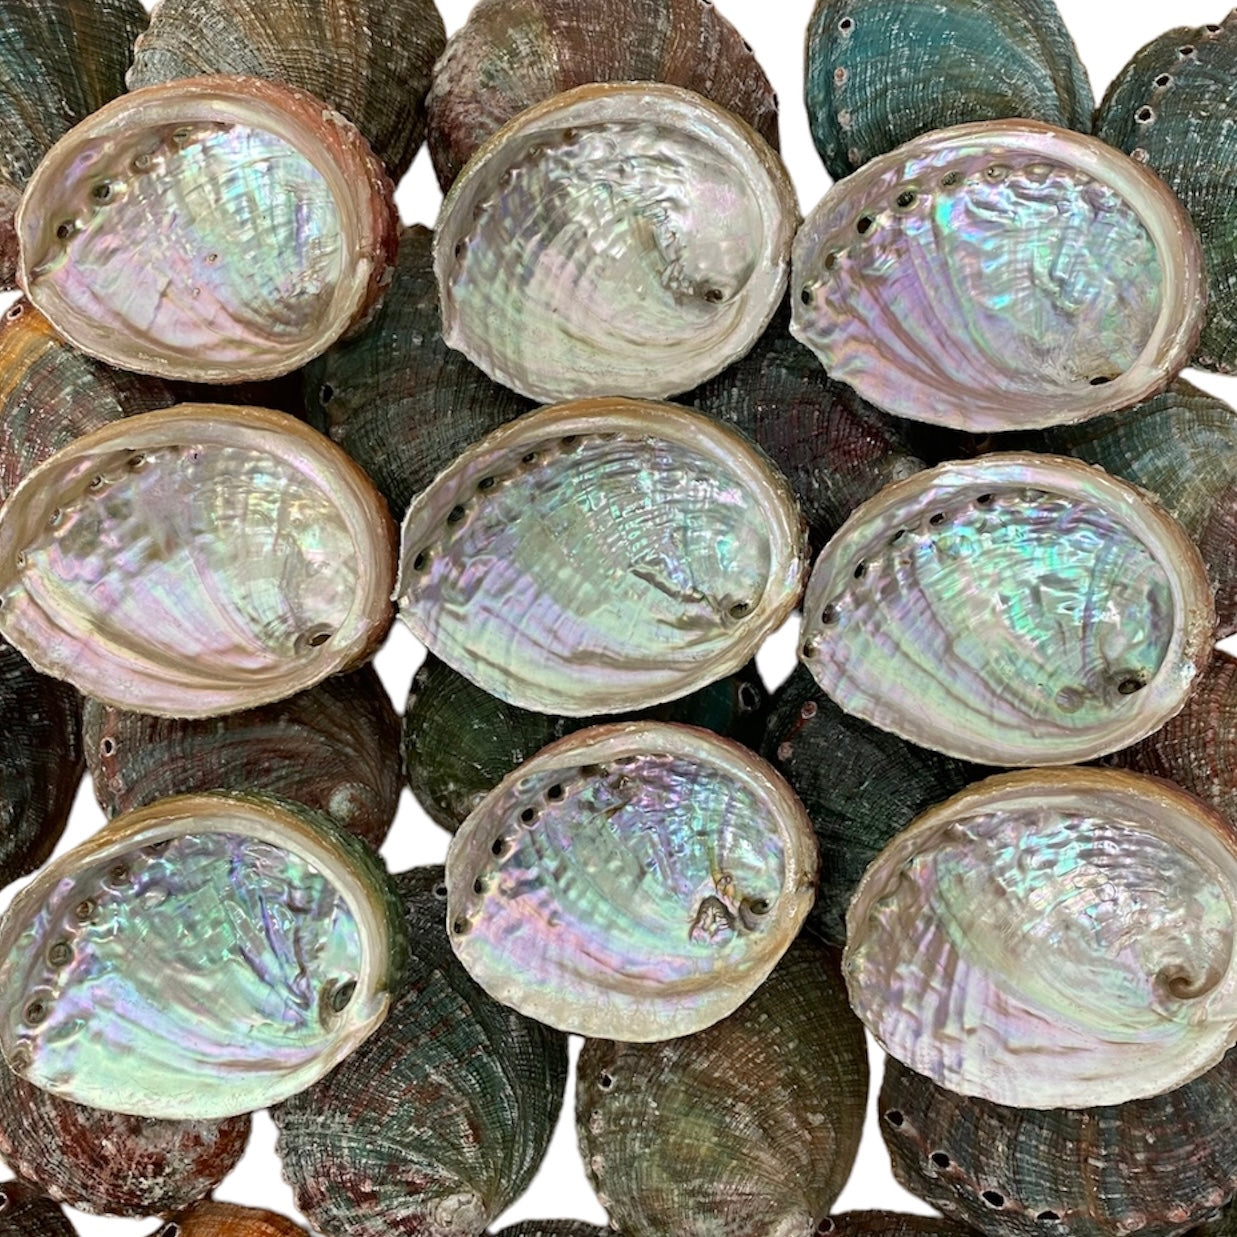 NessaStores 300 Abalone Shells 2.5 to 3.5 Inches | Beautiful All Natural Smudge Bowl - Perfect for Smudge Sticks, Incense Sticks and a Sage Smudge Kit. #JC-020